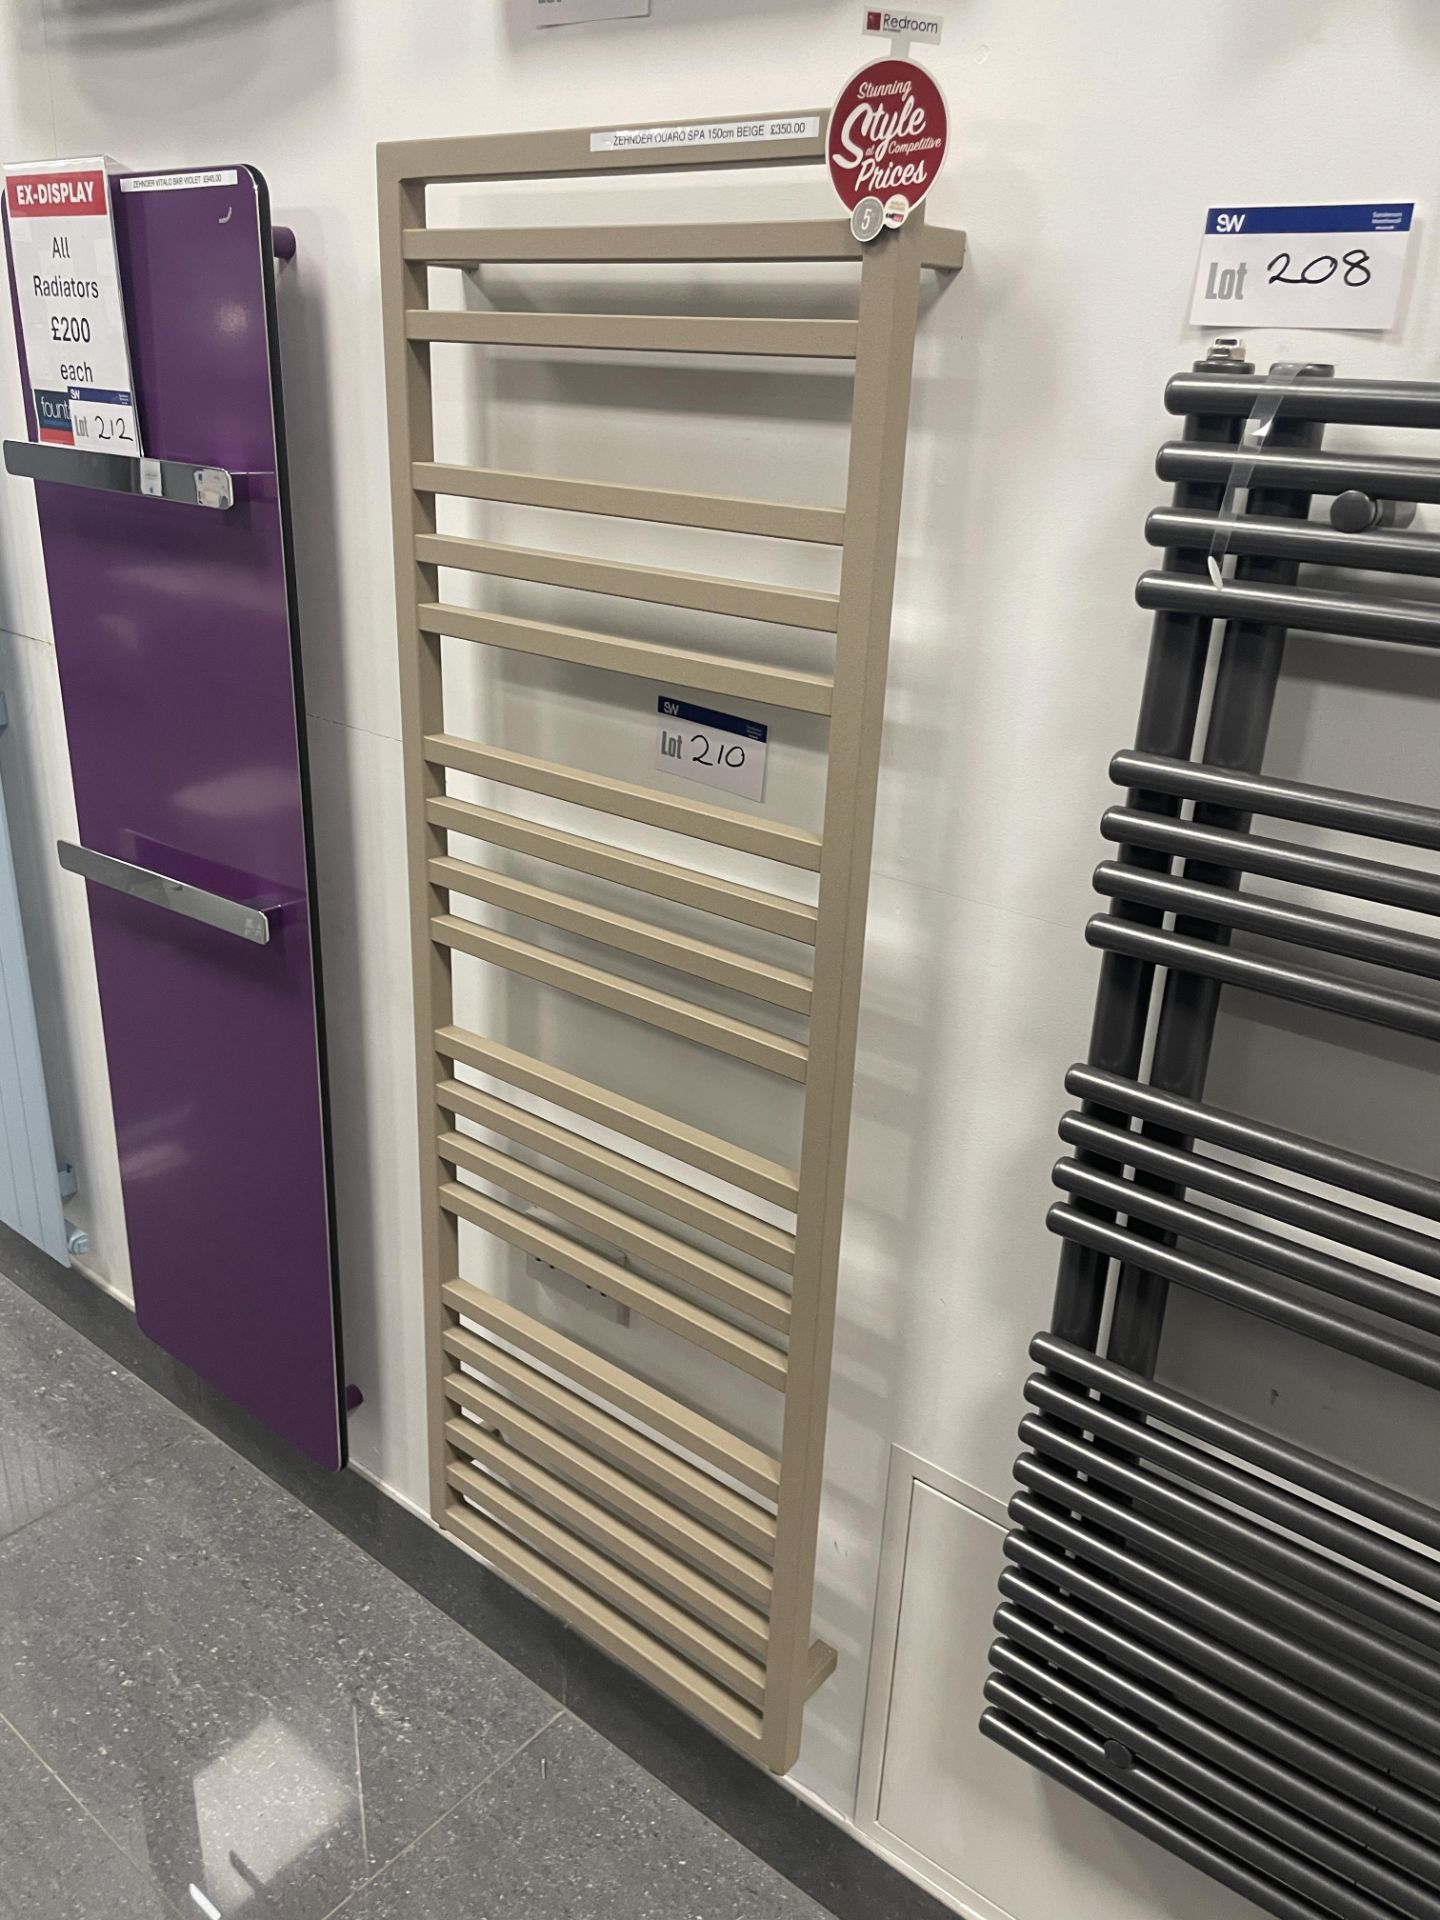 Zehnder Quattro Spa Wall Mounted Vertical Radiator, approx. 1.5m long Please read the following